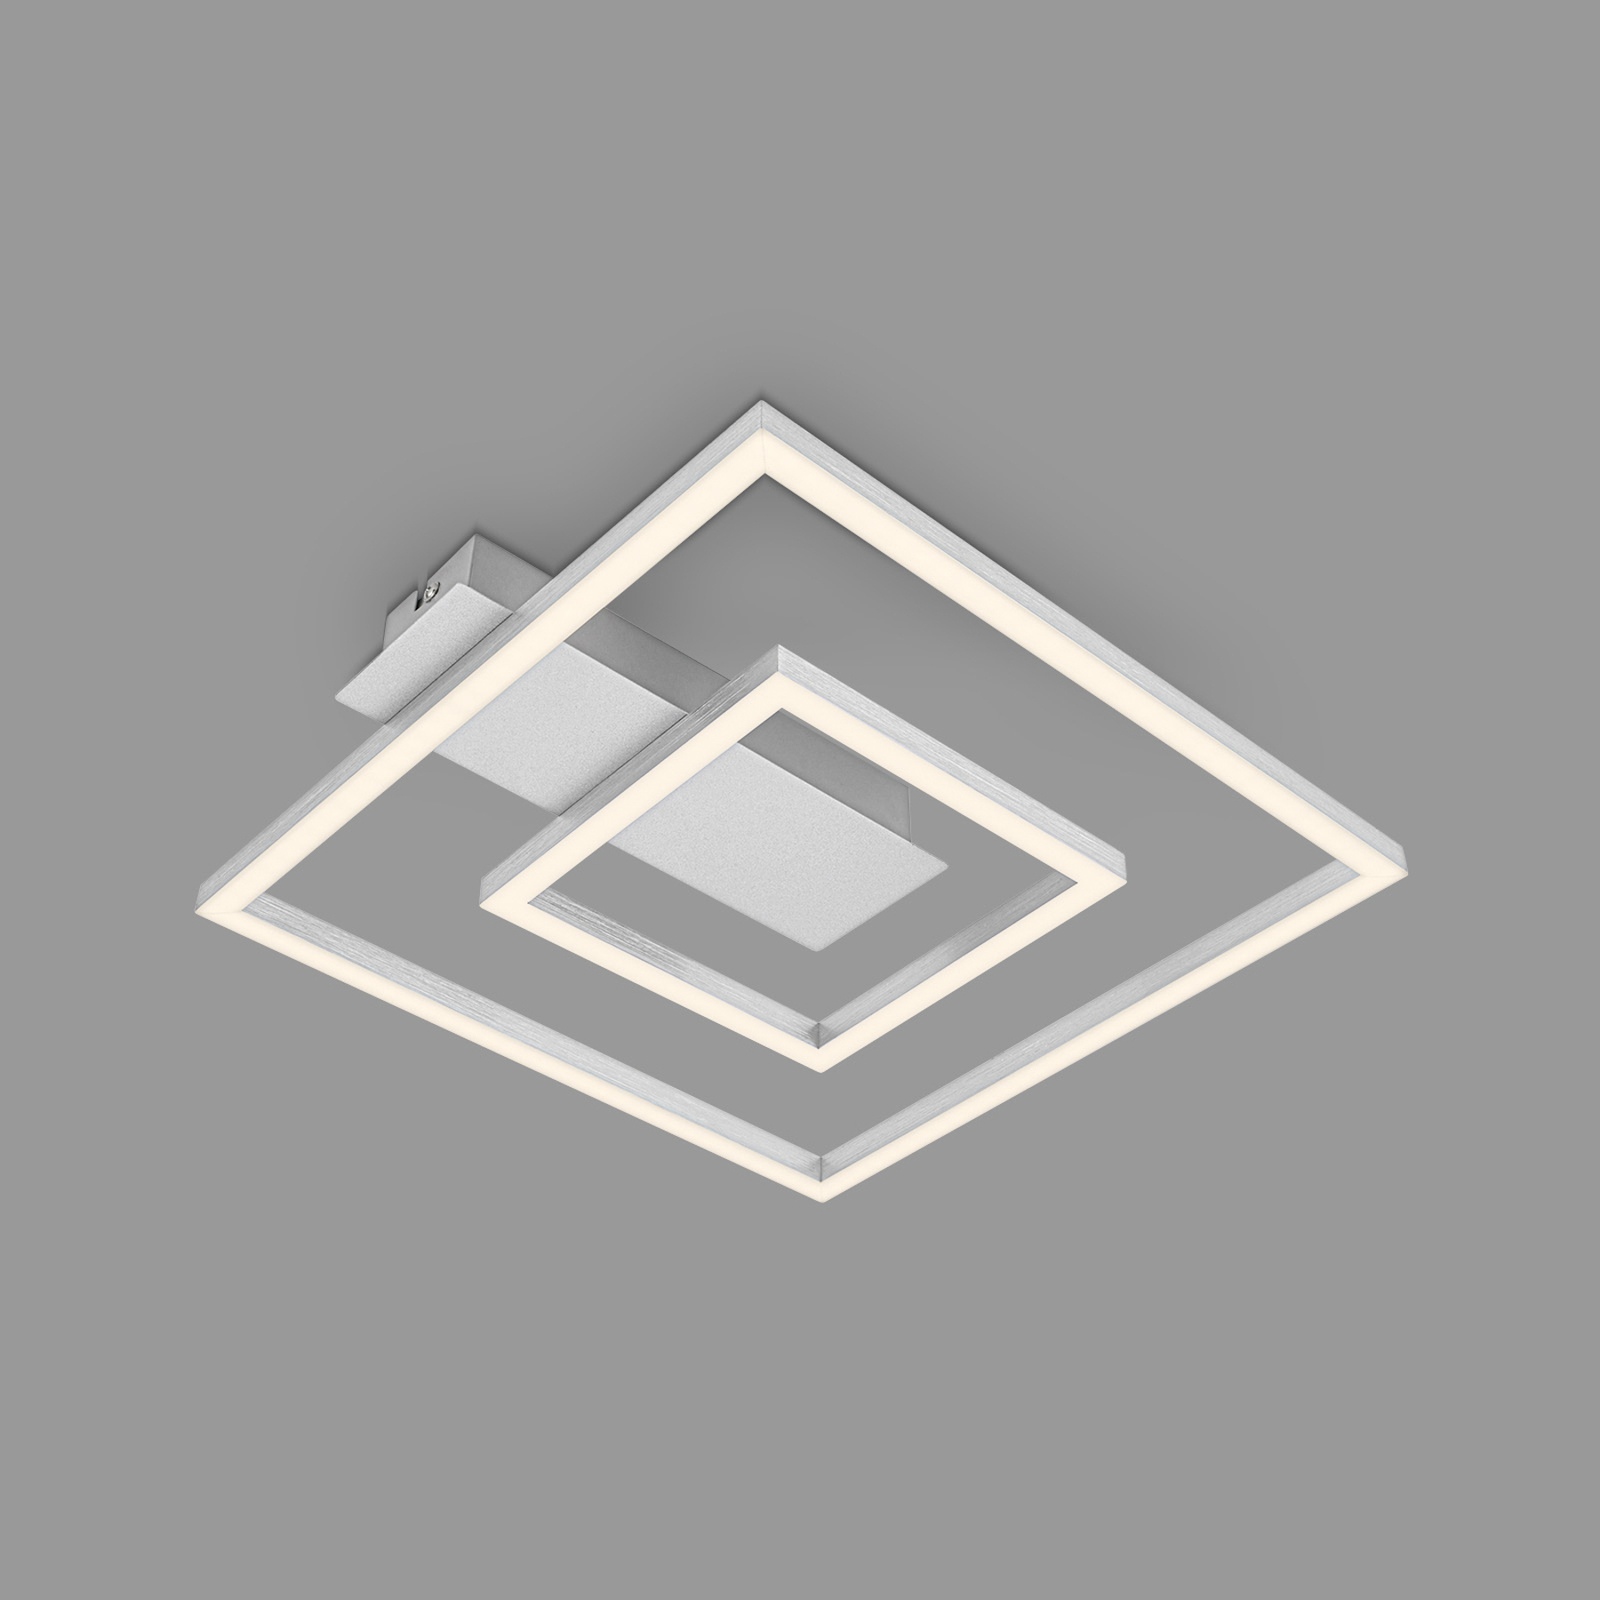 3772 LED ceiling light with two frames aluminium